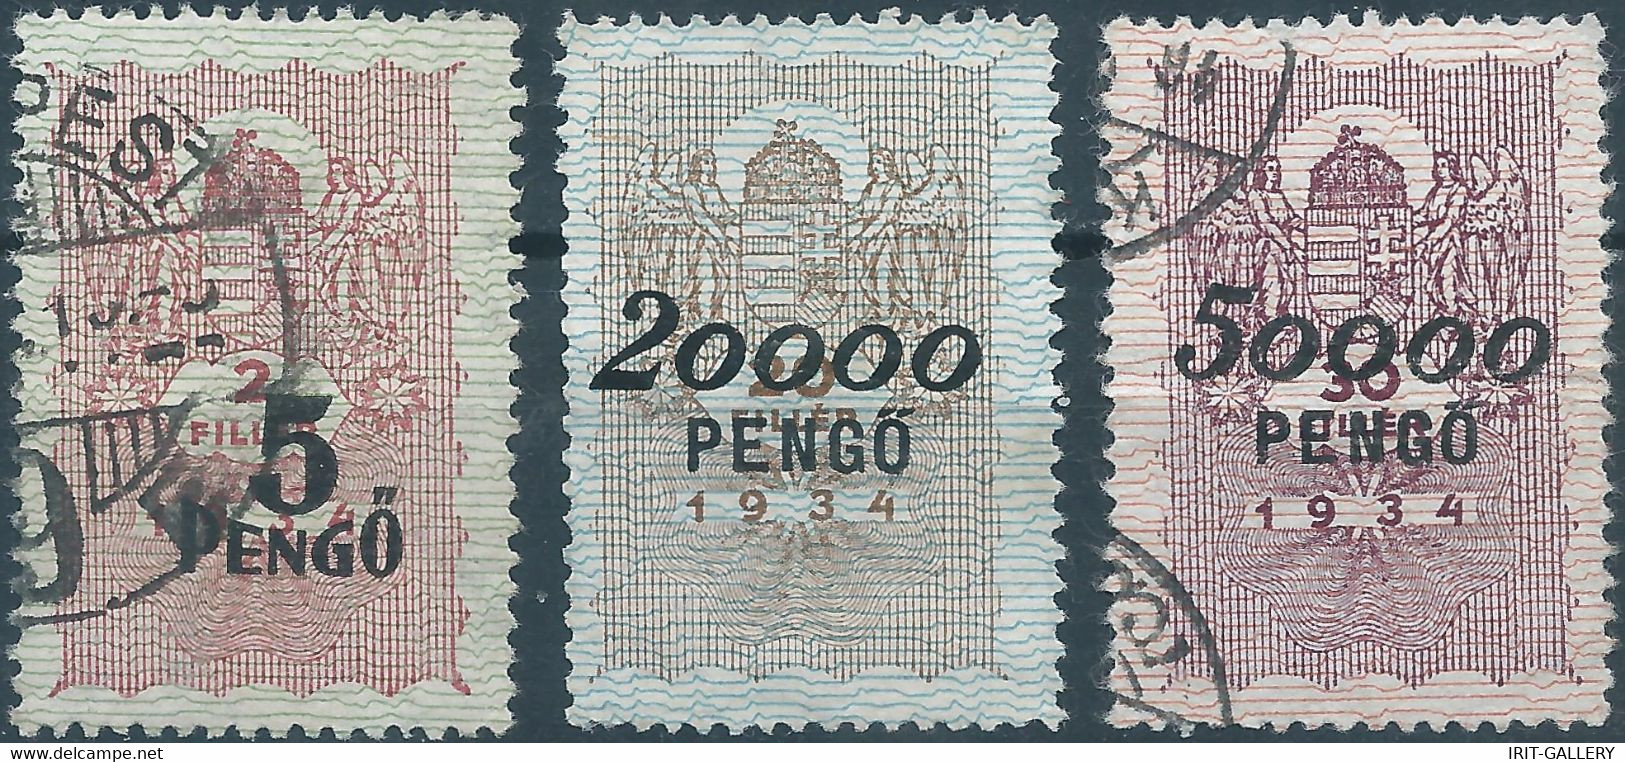 Hungary1945 Revenue Stamps Fiscal Tax For Bill Of Exchange,Overprint On Stamps Of The1934-5Pengo & 20000 And 50000PENGO, - Fiscaux